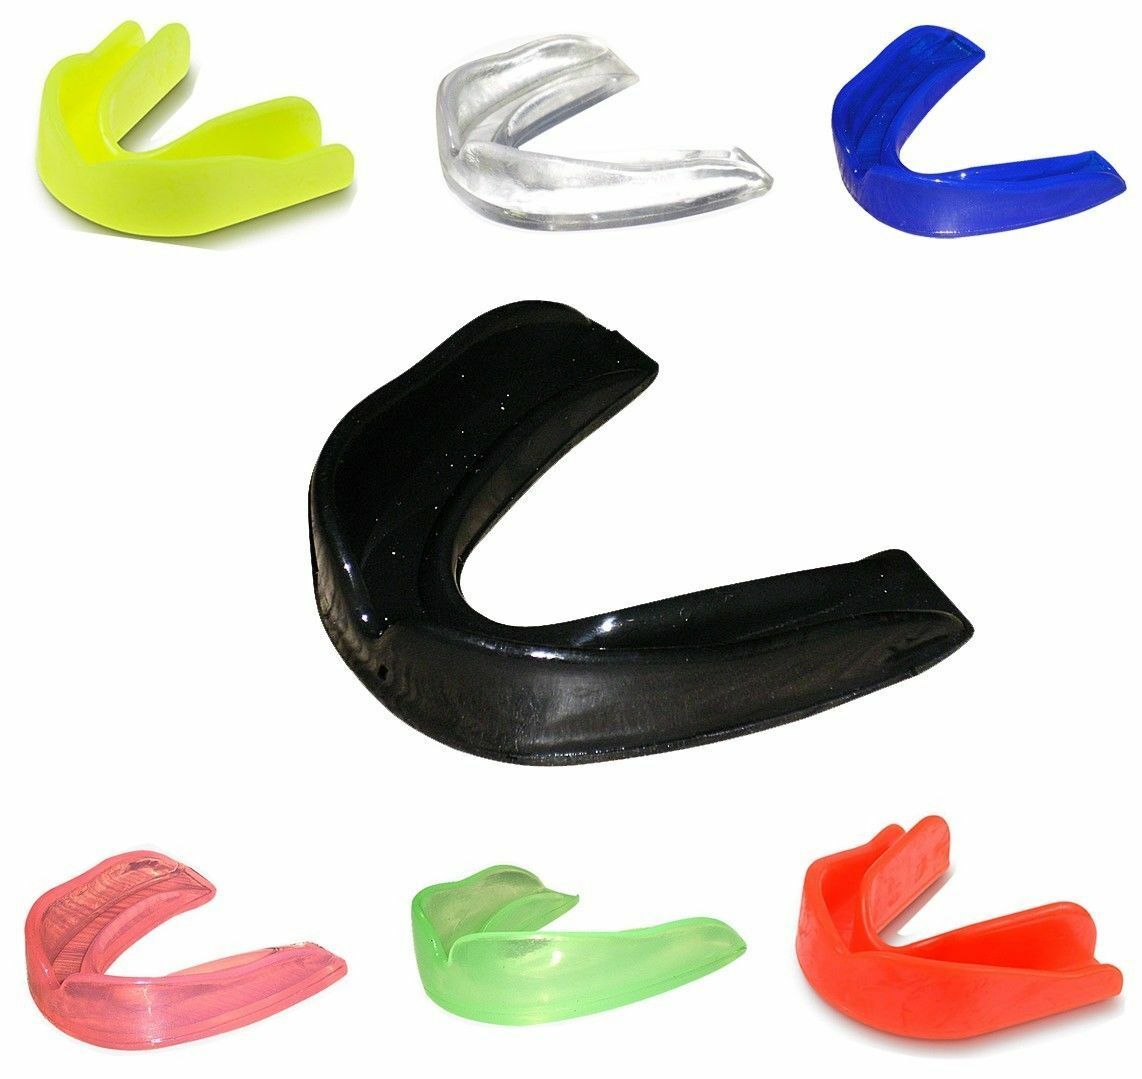 2fit Gum Shield Mouth Guard Boil Bite All Sports Mma Boxing Footbal Rugby Hockey